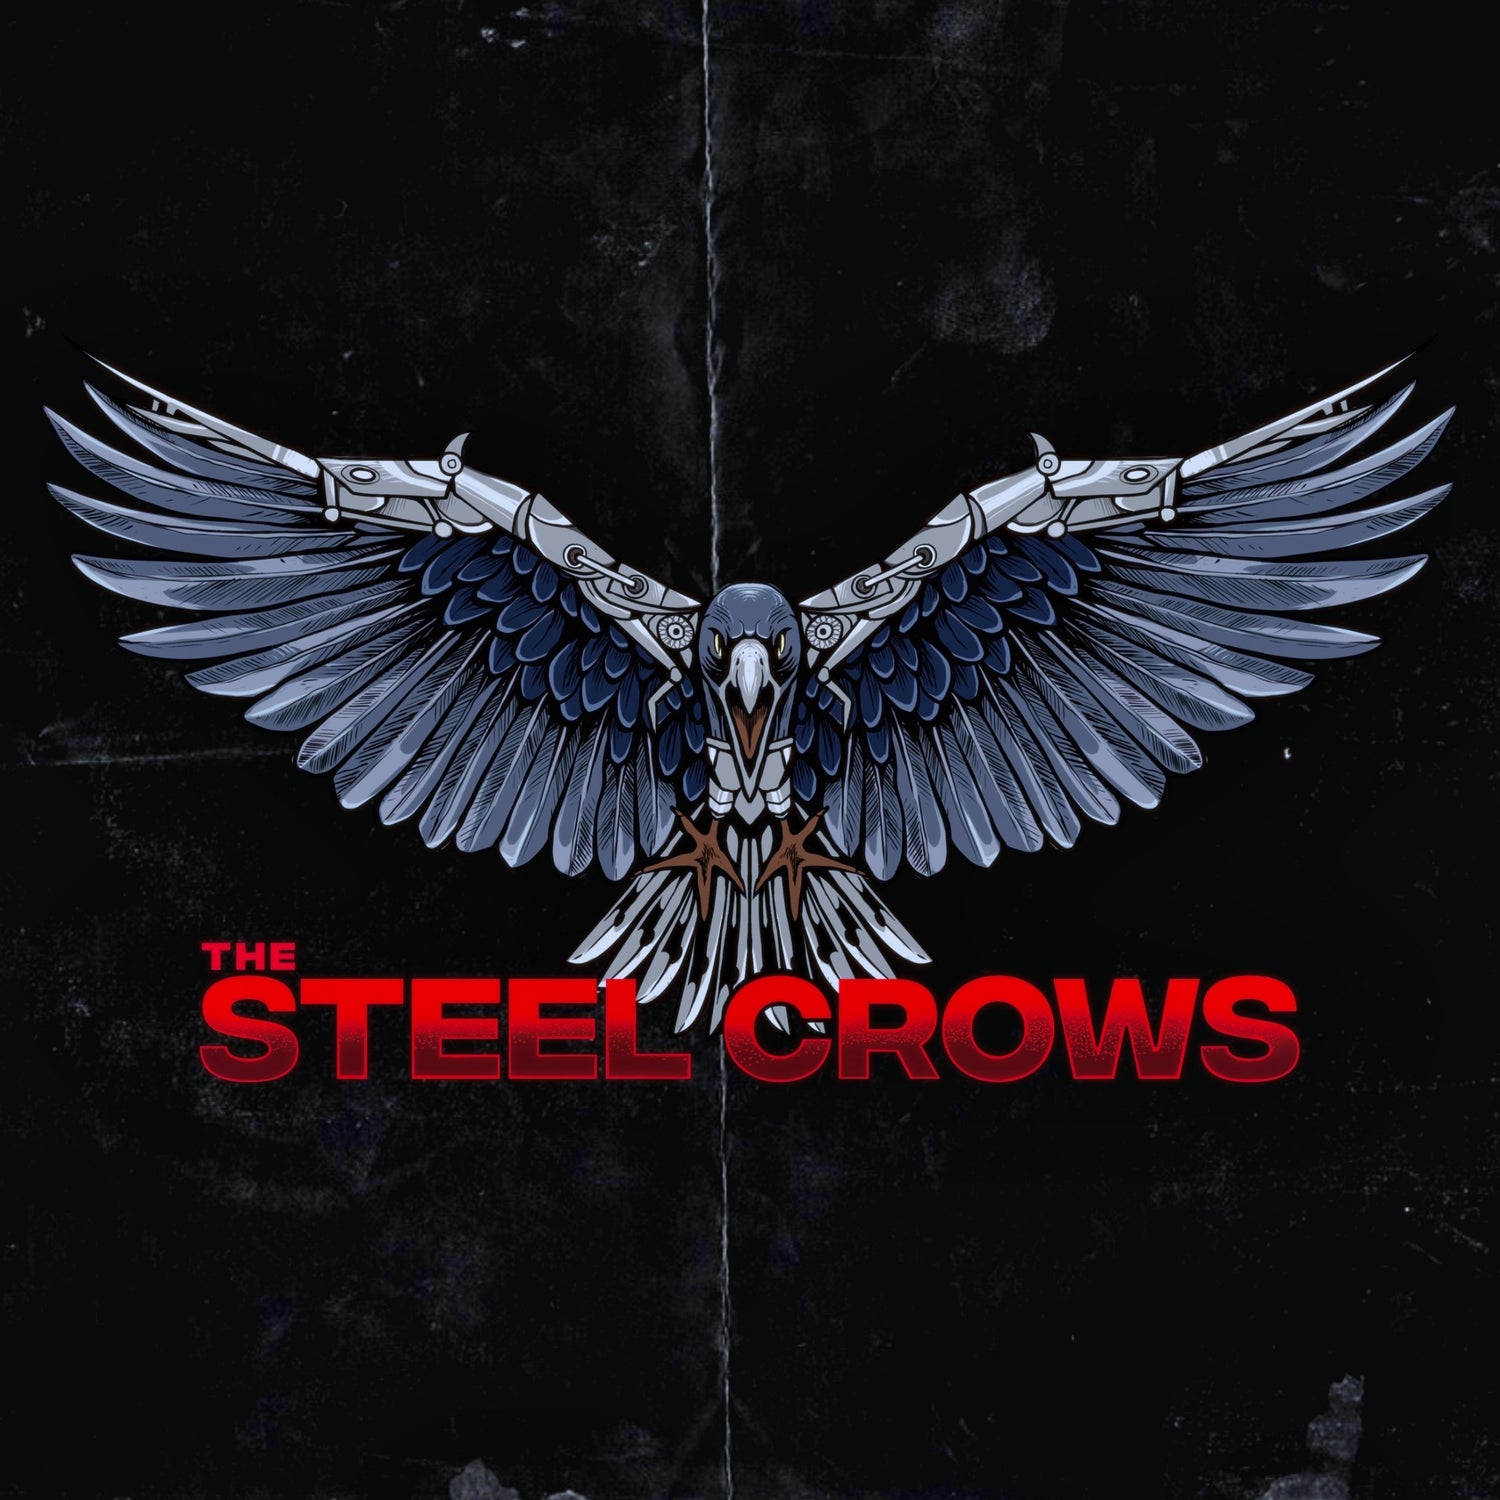 "The Steel Crows" Debut Album Collection